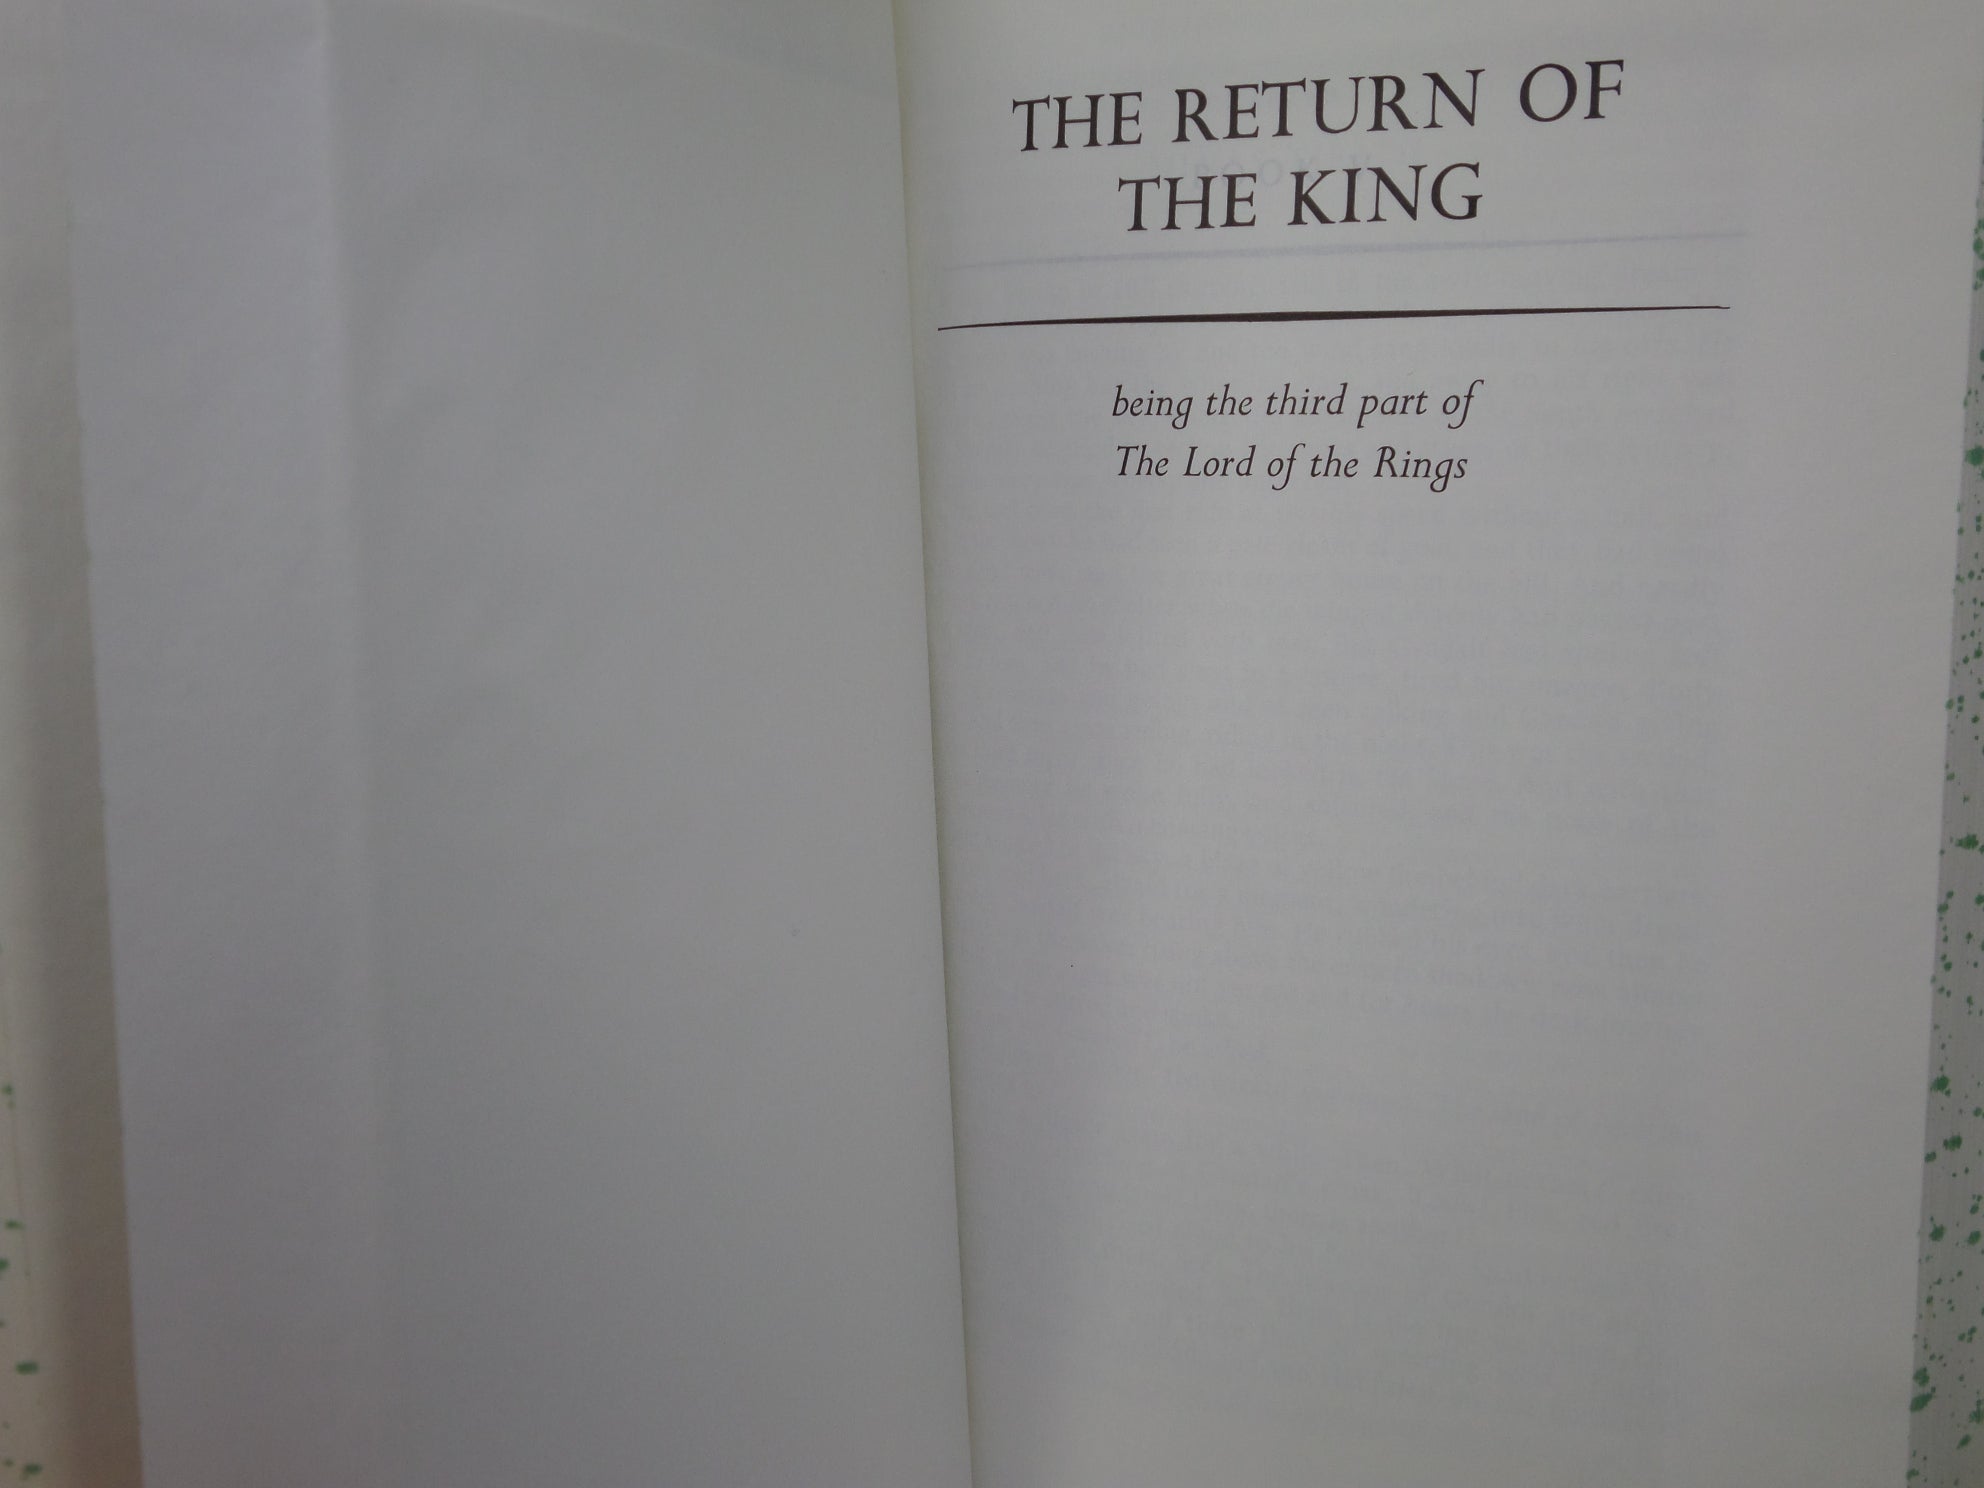 THE LORD OF THE RINGS TRILOGY BY J.R.R. TOLKIEN 1984 FINE DELUXE EDITION